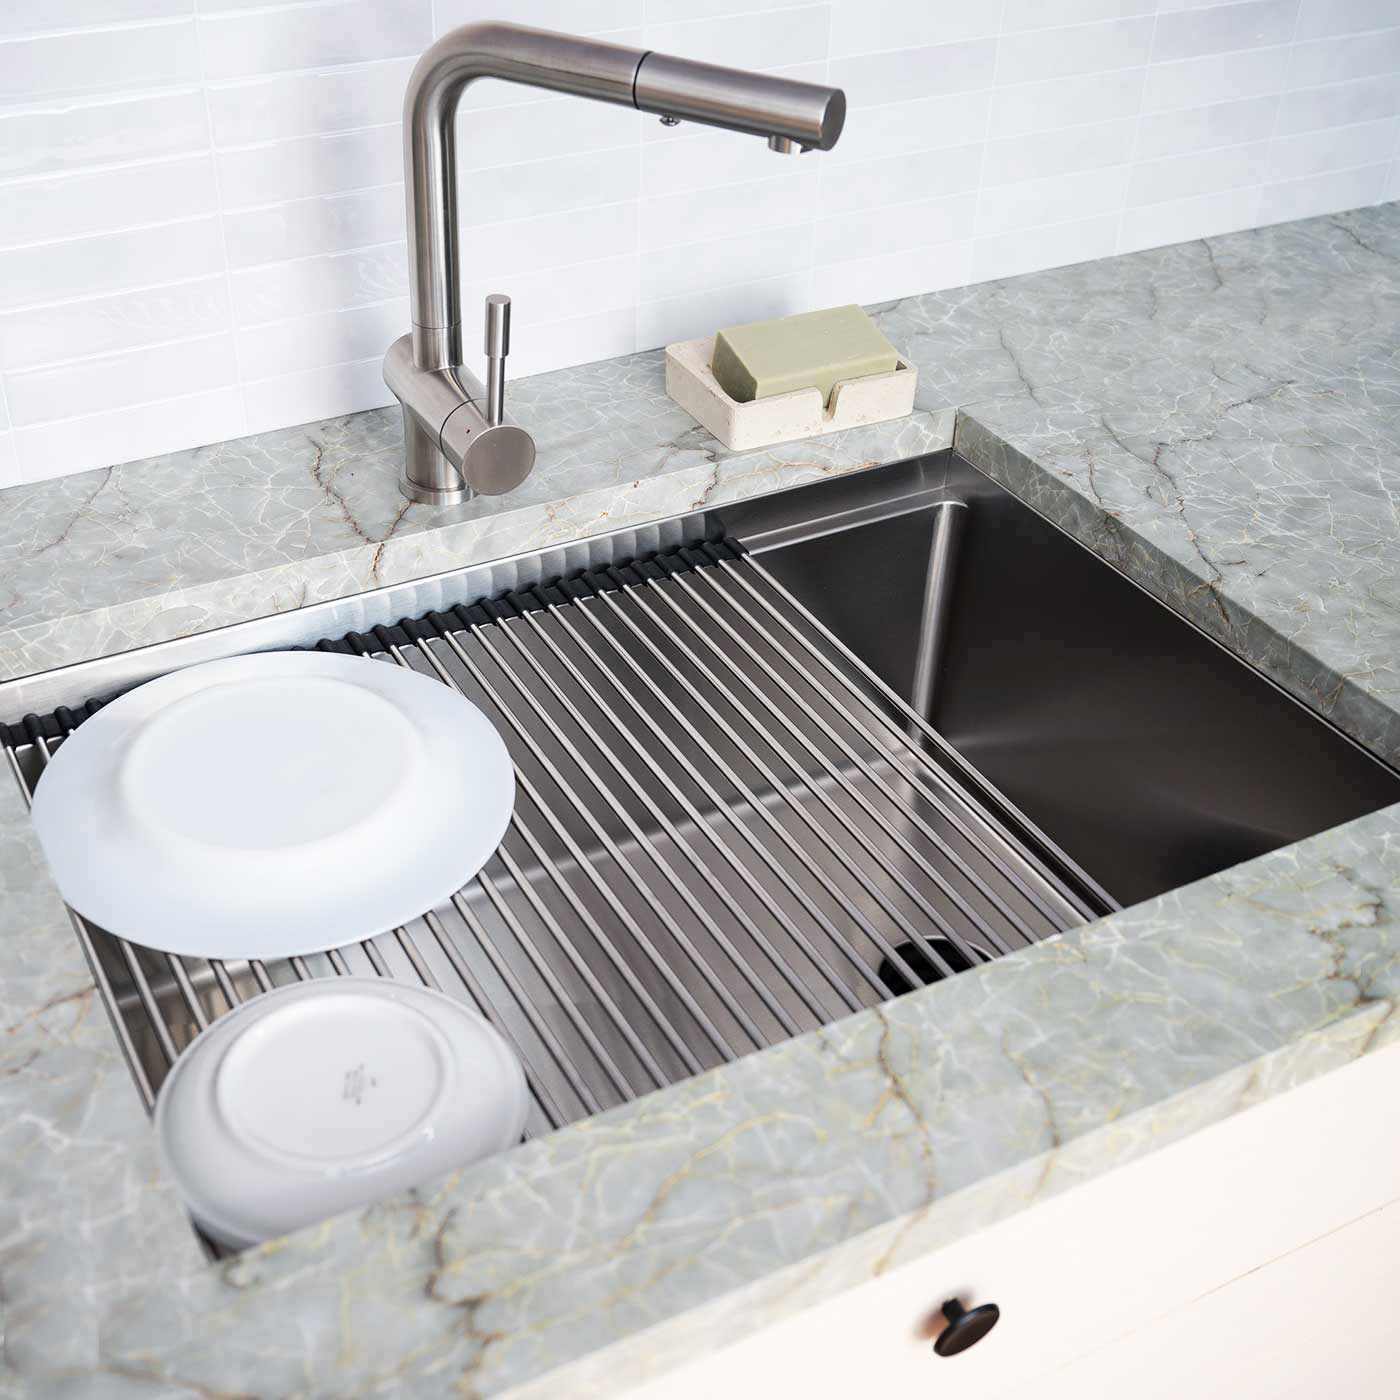 28 inch workstation sink made with 16 gauge stainless steel and offset reversible seamless drain